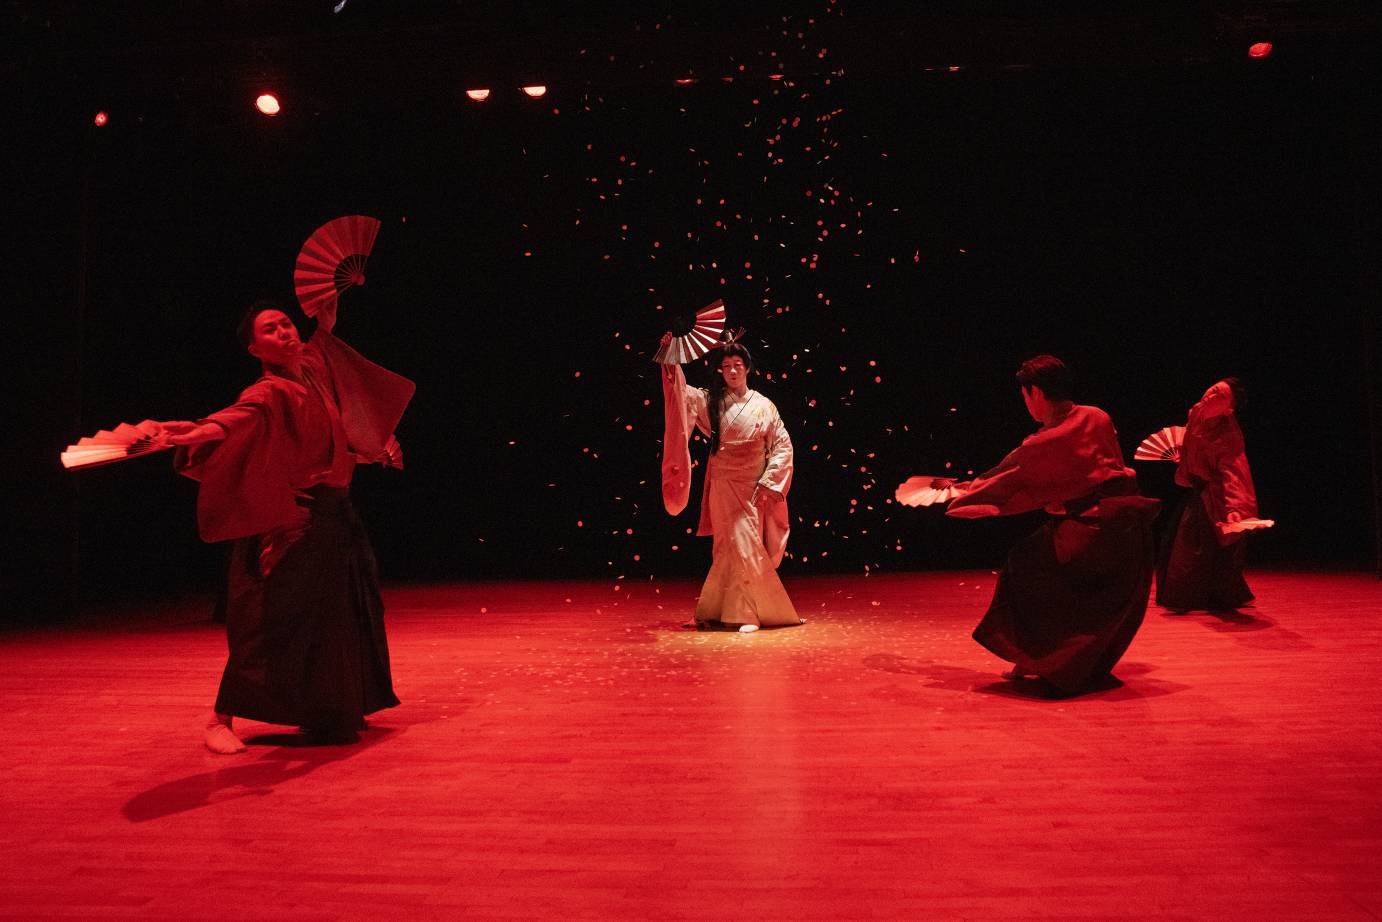 All performers are fluttering fans while standing on a red-bathed stage.